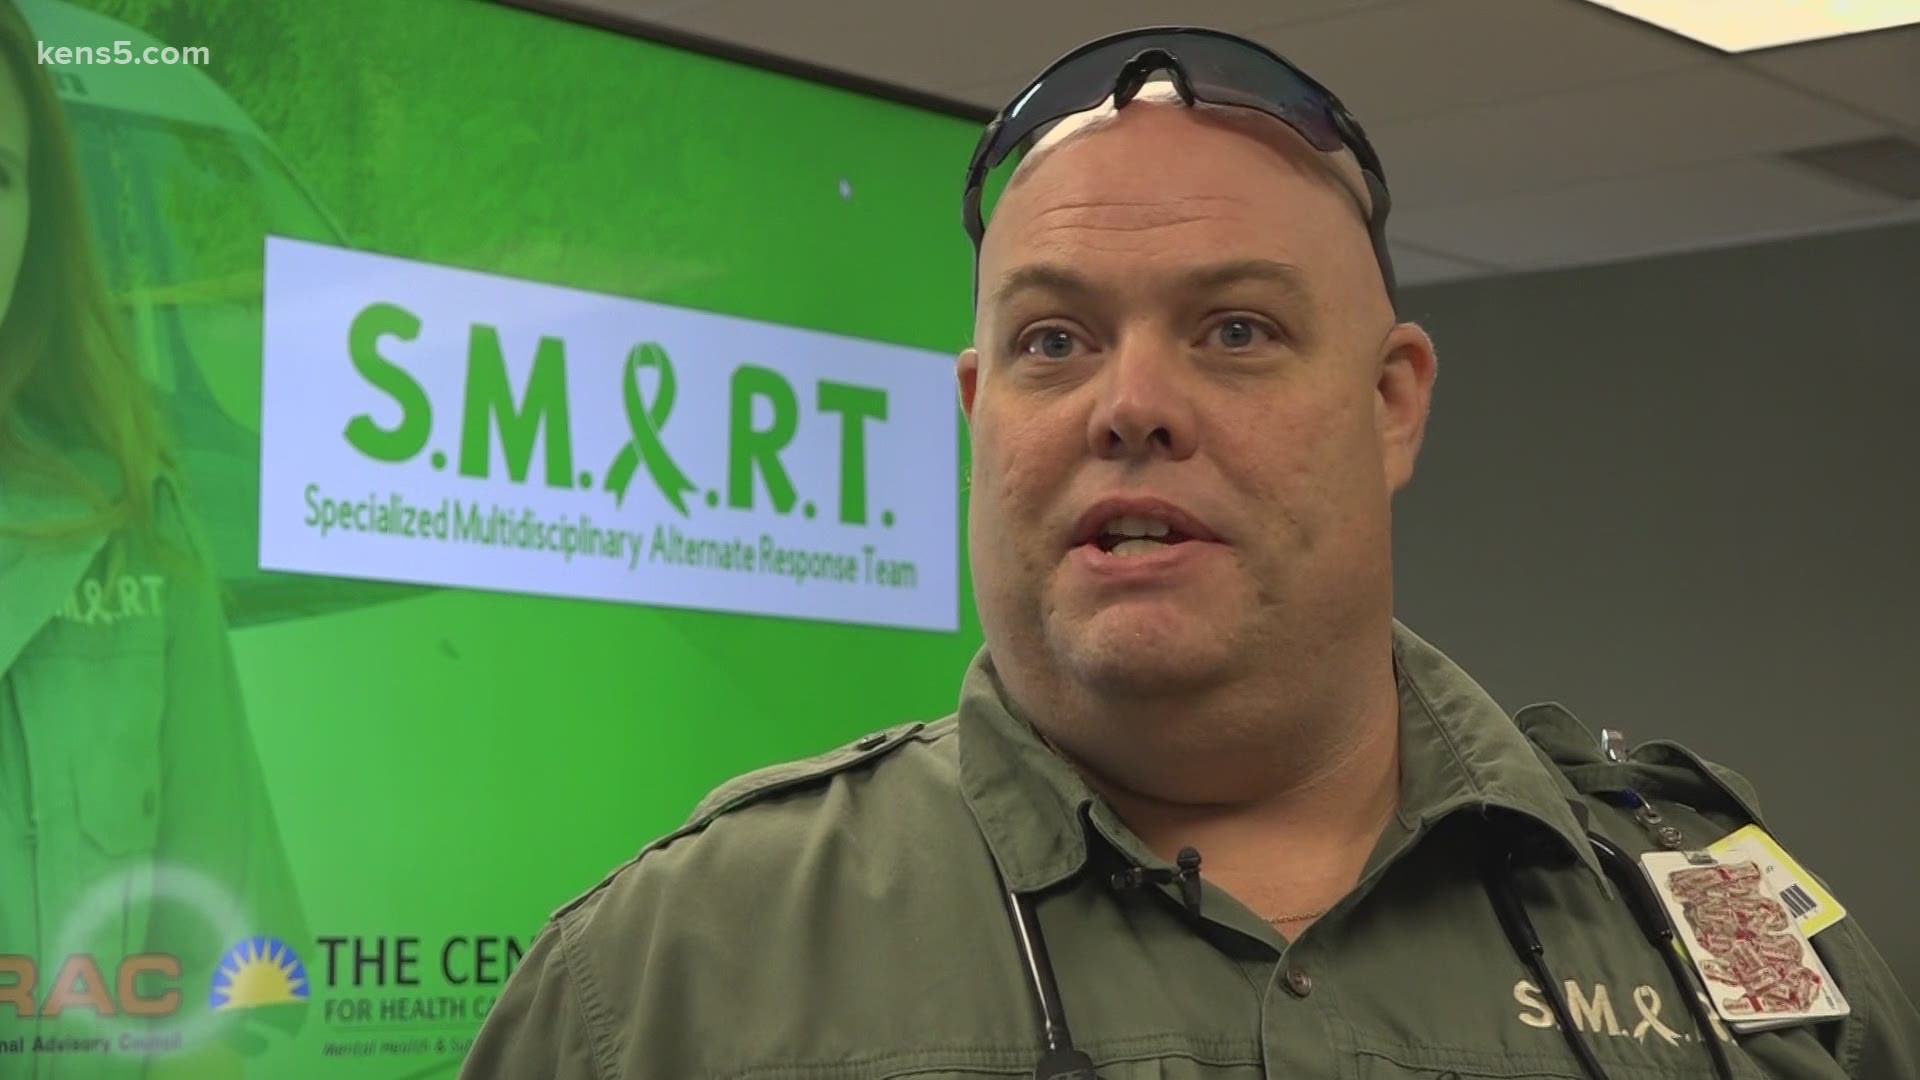 S.M.A.R.T., short for the Specialized Multi-disciplinary Alternate Response Team, is being deployed to help those suffering from mental health crises.